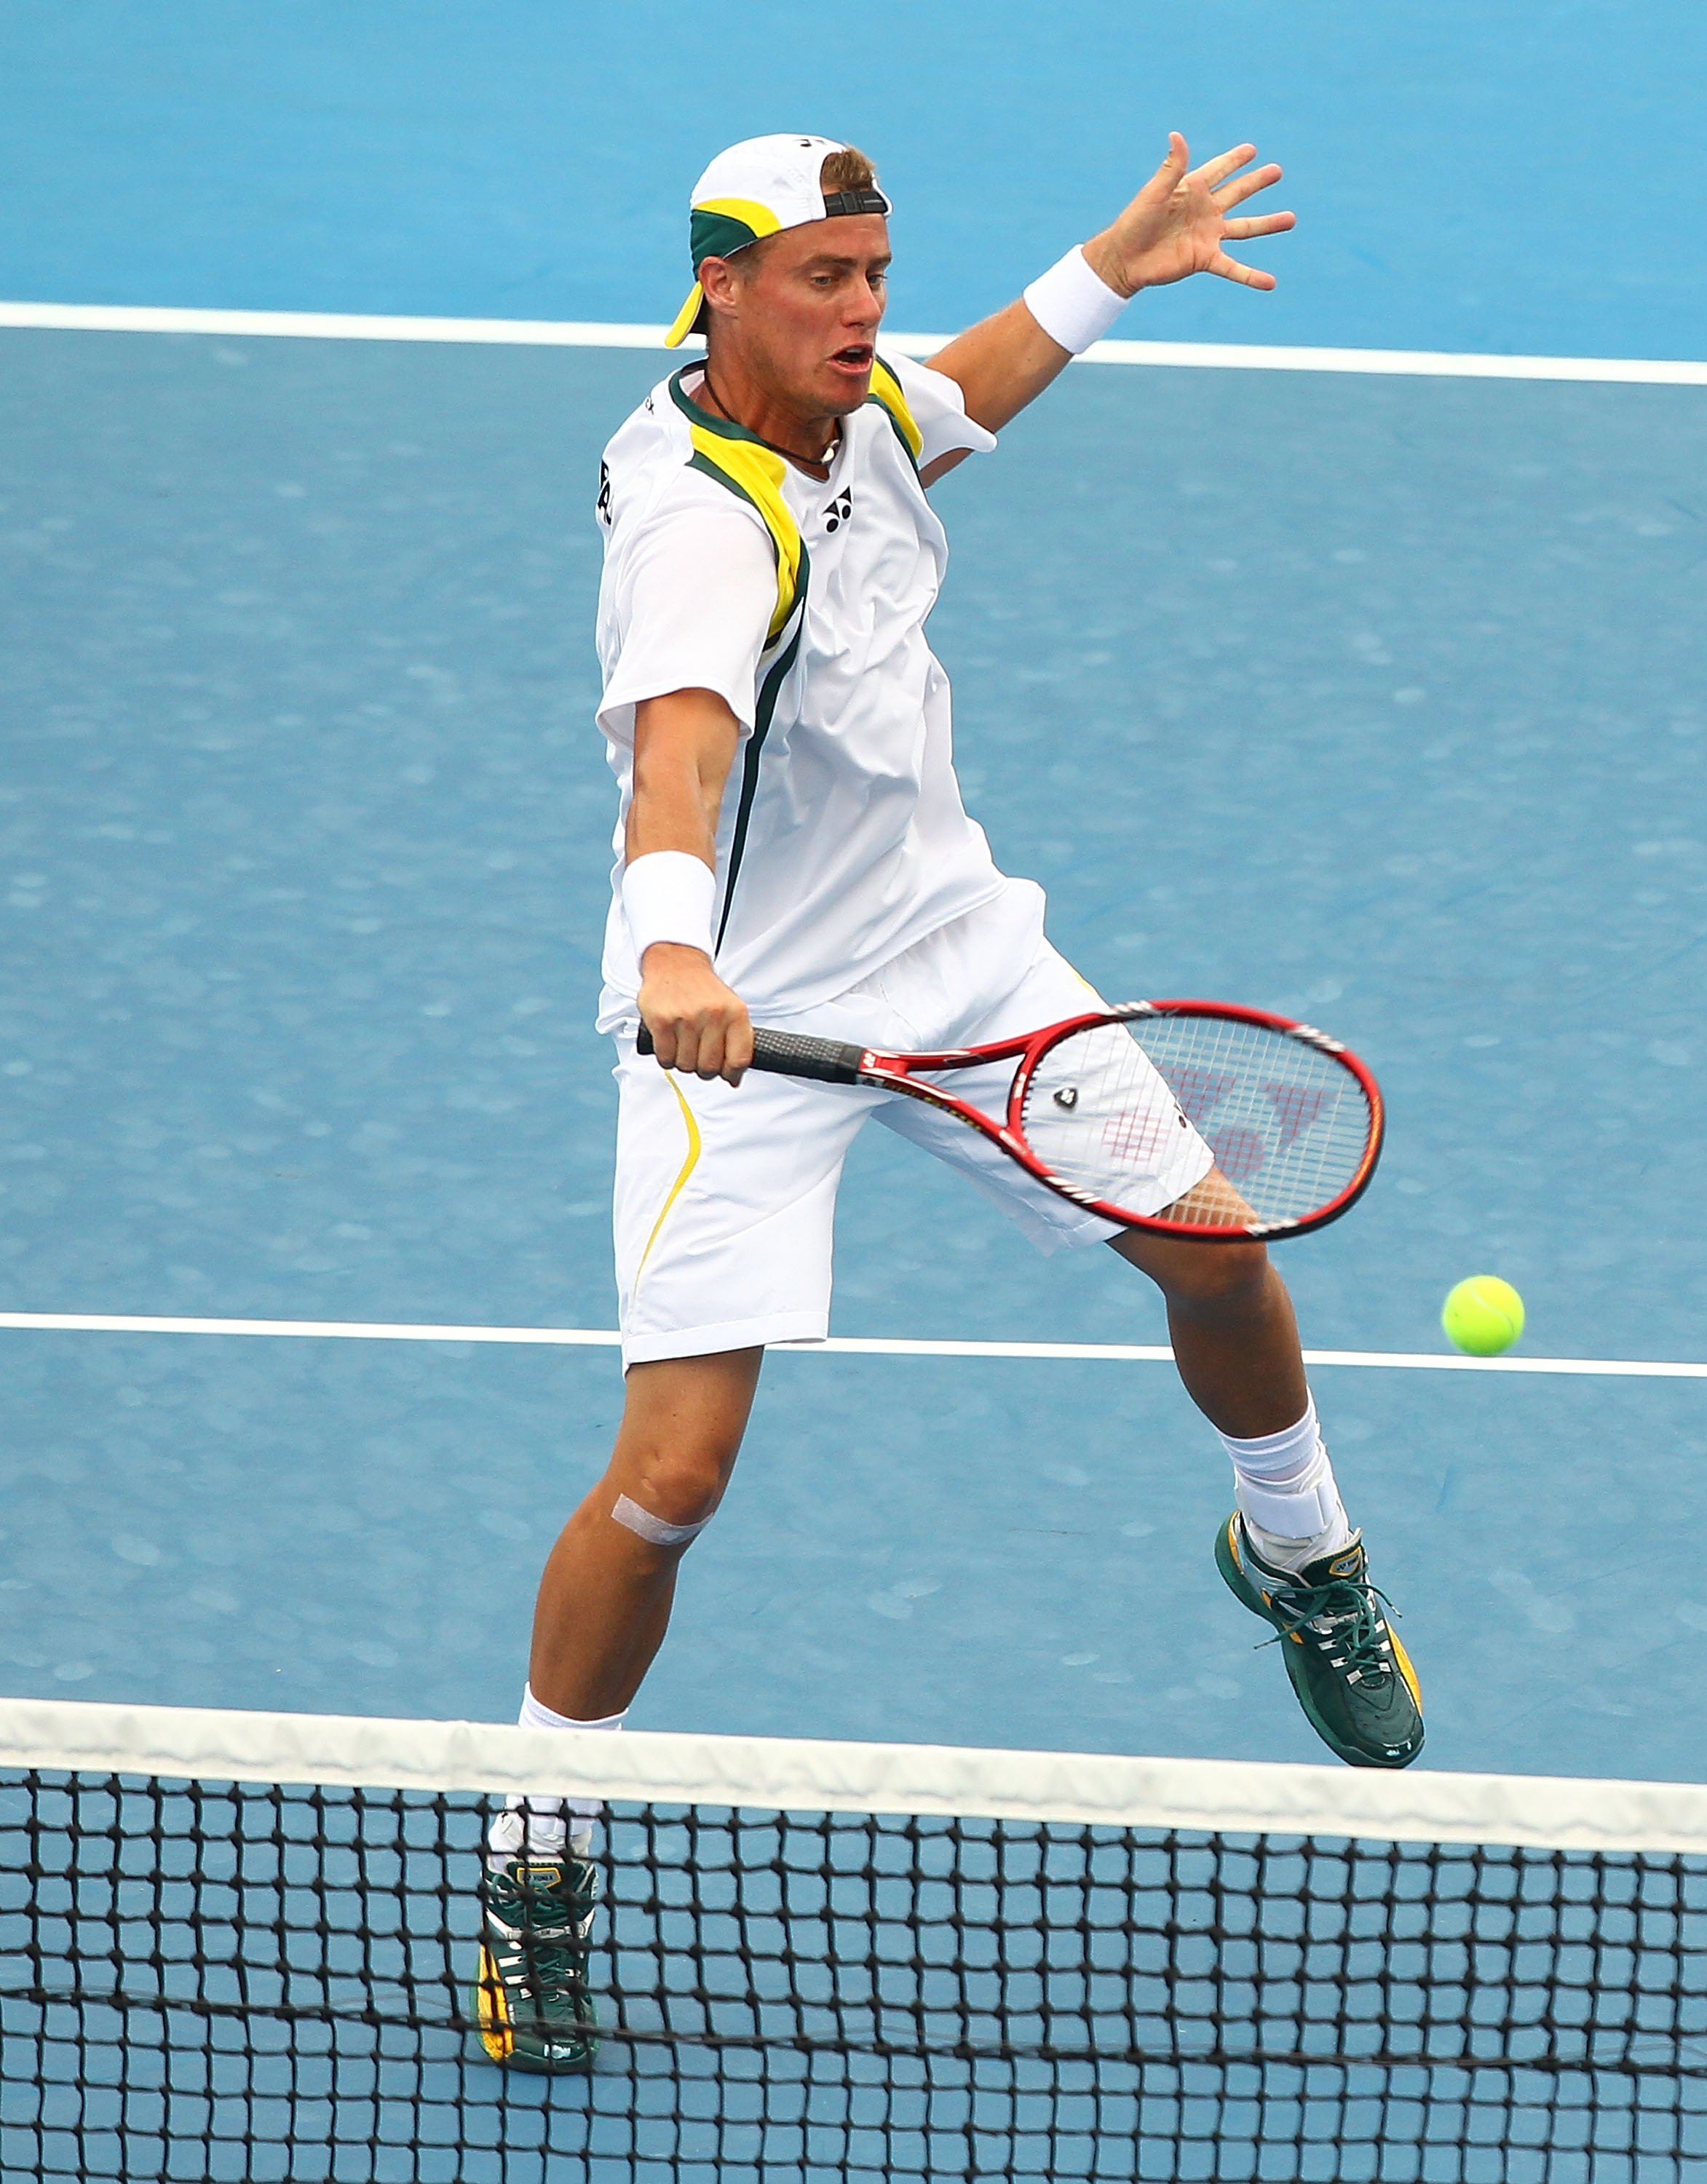 CAIRNS, AUSTRALIA - SEPTEMBER 18:  Lleyton Hewitt of Australia returns a shot during the doubles match against Olivier Rochus and Ruben Bemelmans of Belgium during day two of the Davis Cup tie between Australia and Belgium at Cairns International Tennis C